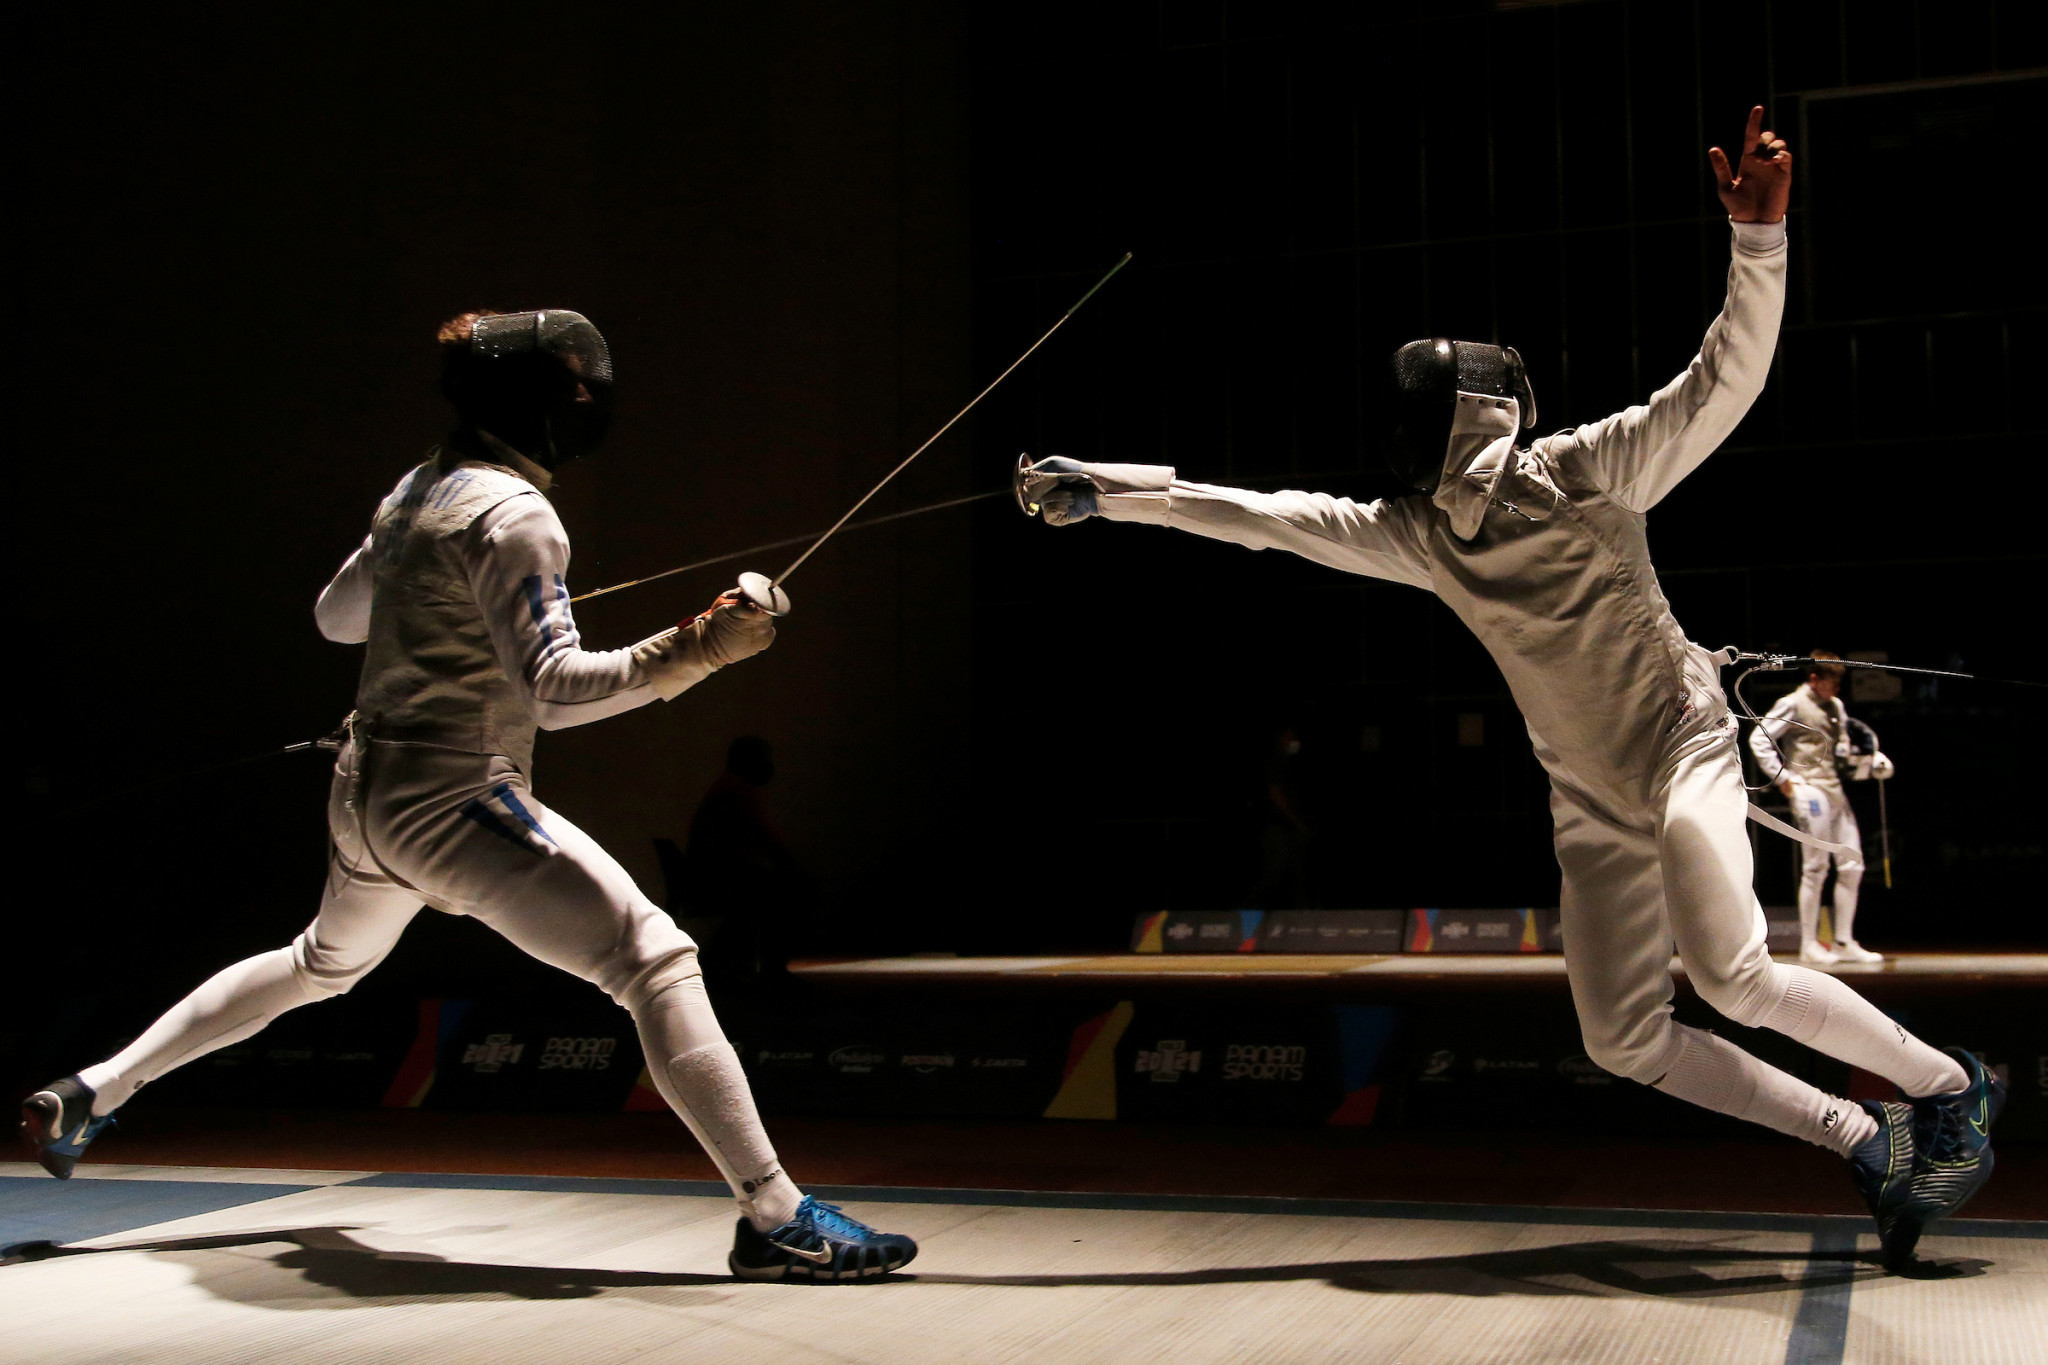 Dante Cerquetti of Argentina, left, downed Colombia's Miguel Grajales Mena in the men's individual foil fencing final ©Agencia.Xpress Media